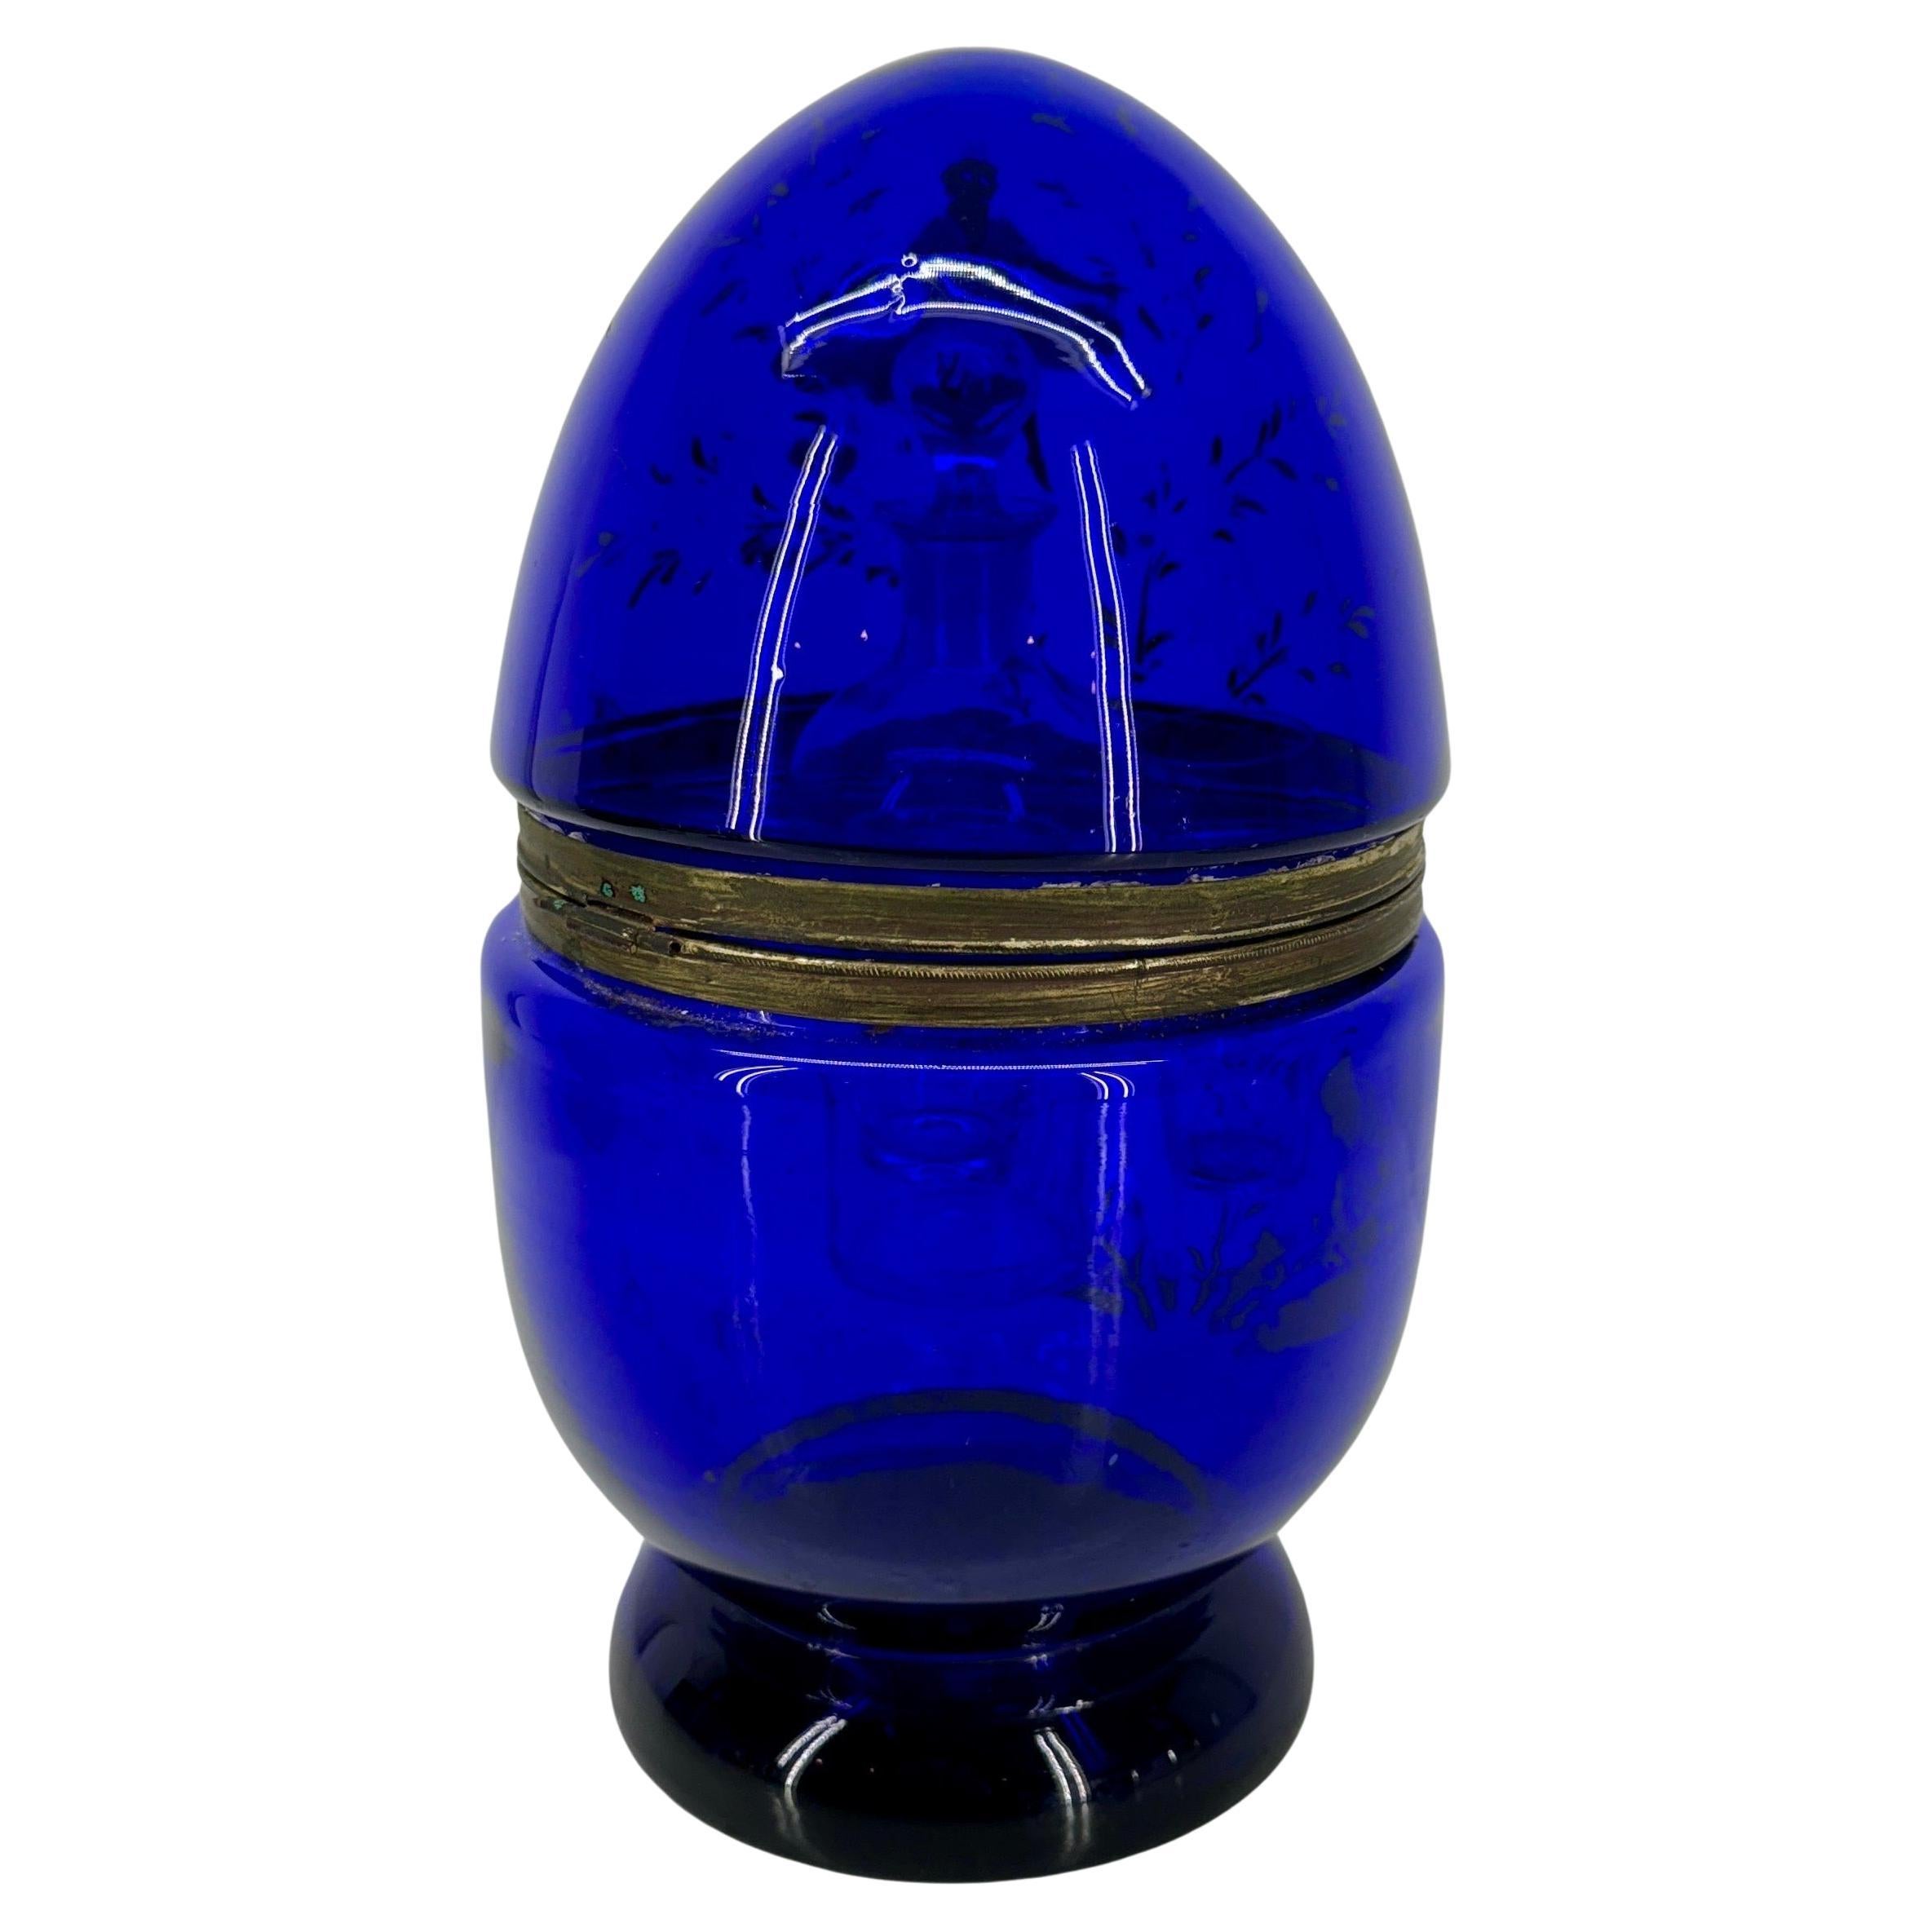 Vintage Blue Glass Art Egg Domed Decanter, 1950's In Good Condition For Sale In Haddonfield, NJ